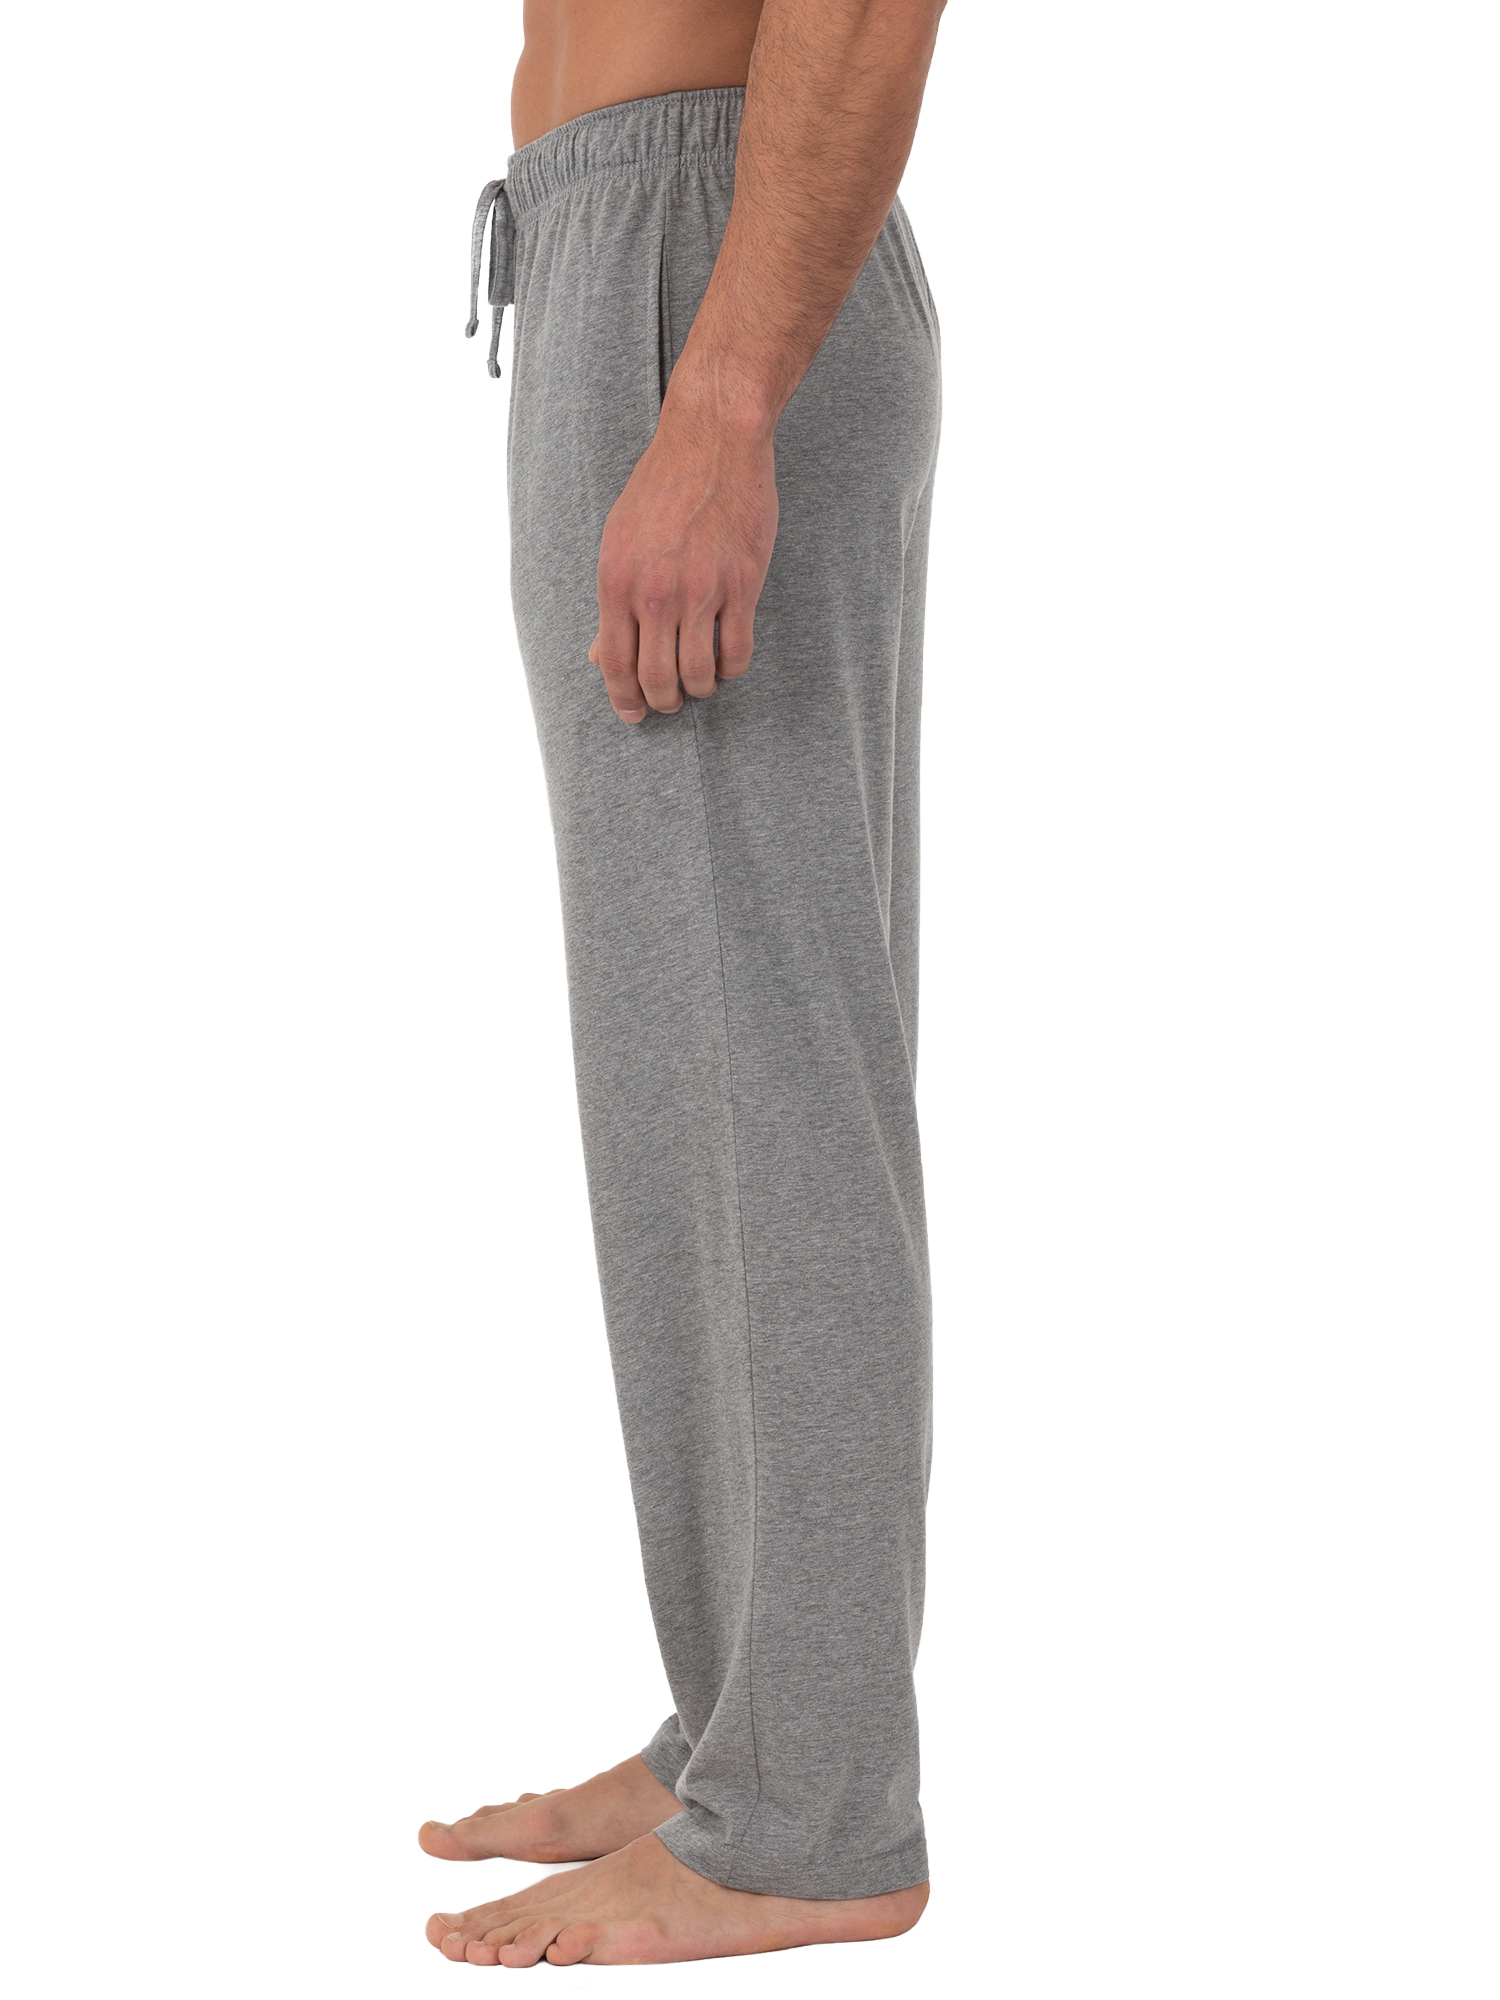 Fruit of the Loom Men's and Big Men's Jersey Knit Pajama Pants, Sizes S-6XL - image 3 of 9